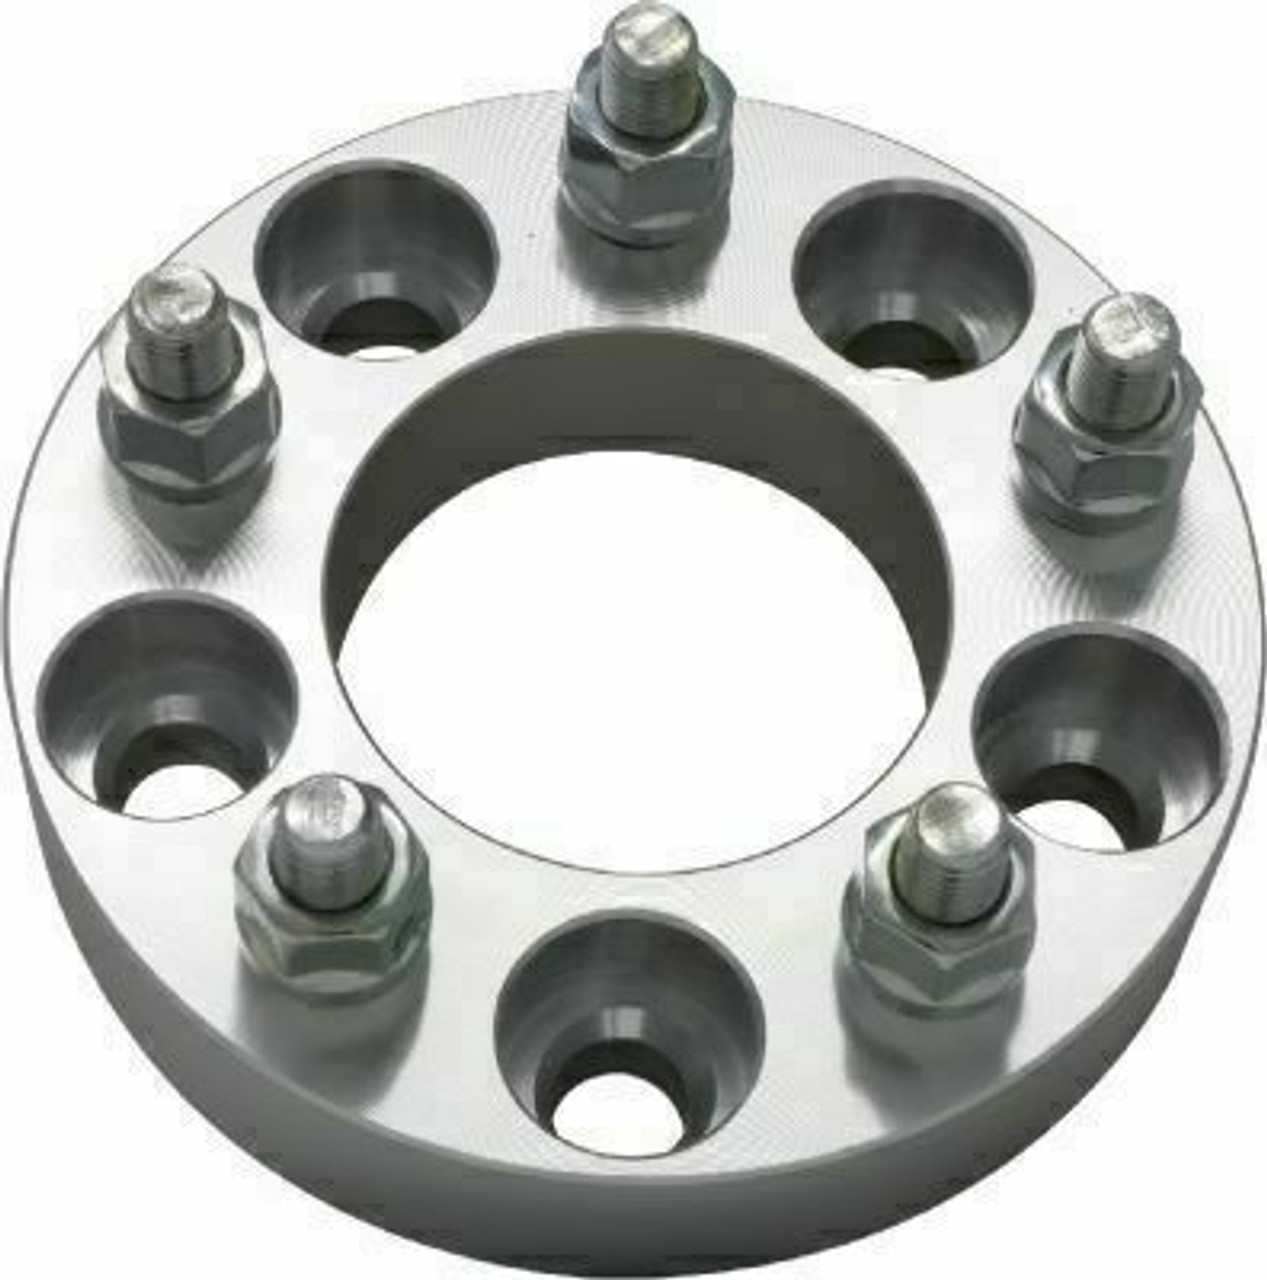 5x5.50 to 5x5.50 Wheel Adapter - 1/2" / 2" Thick / 87.1mm CB